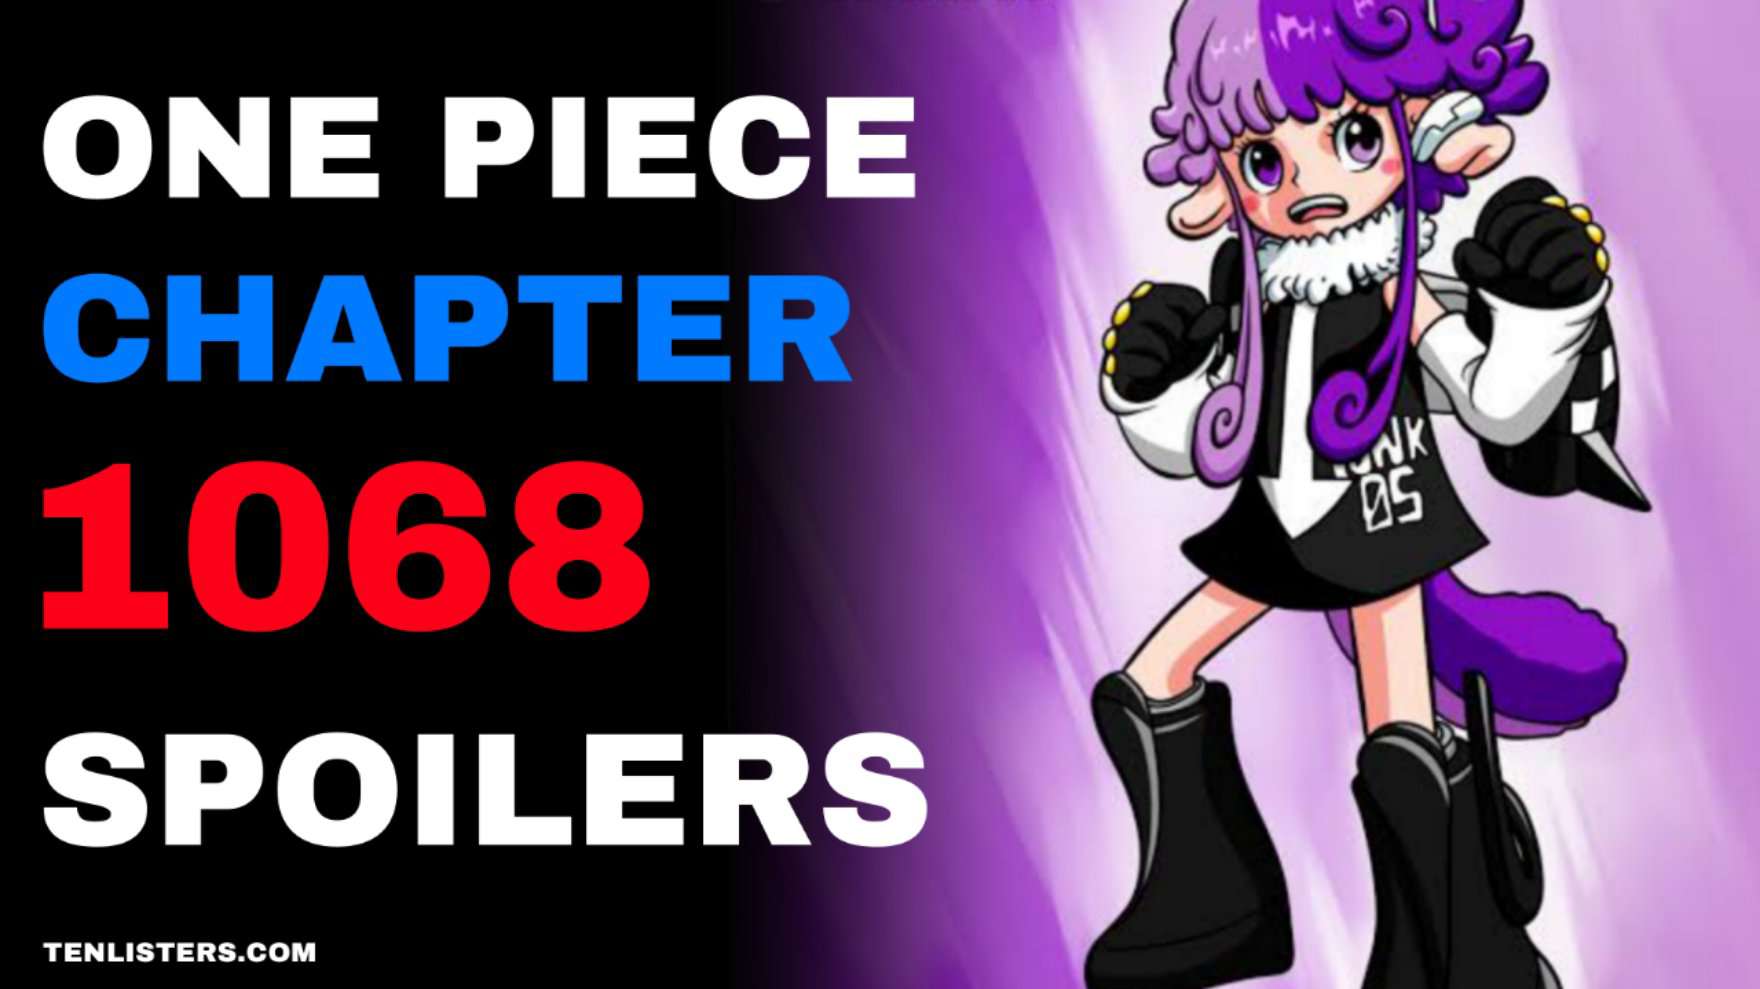 ONE PIECE CHAPTER 1068 SPOILORS